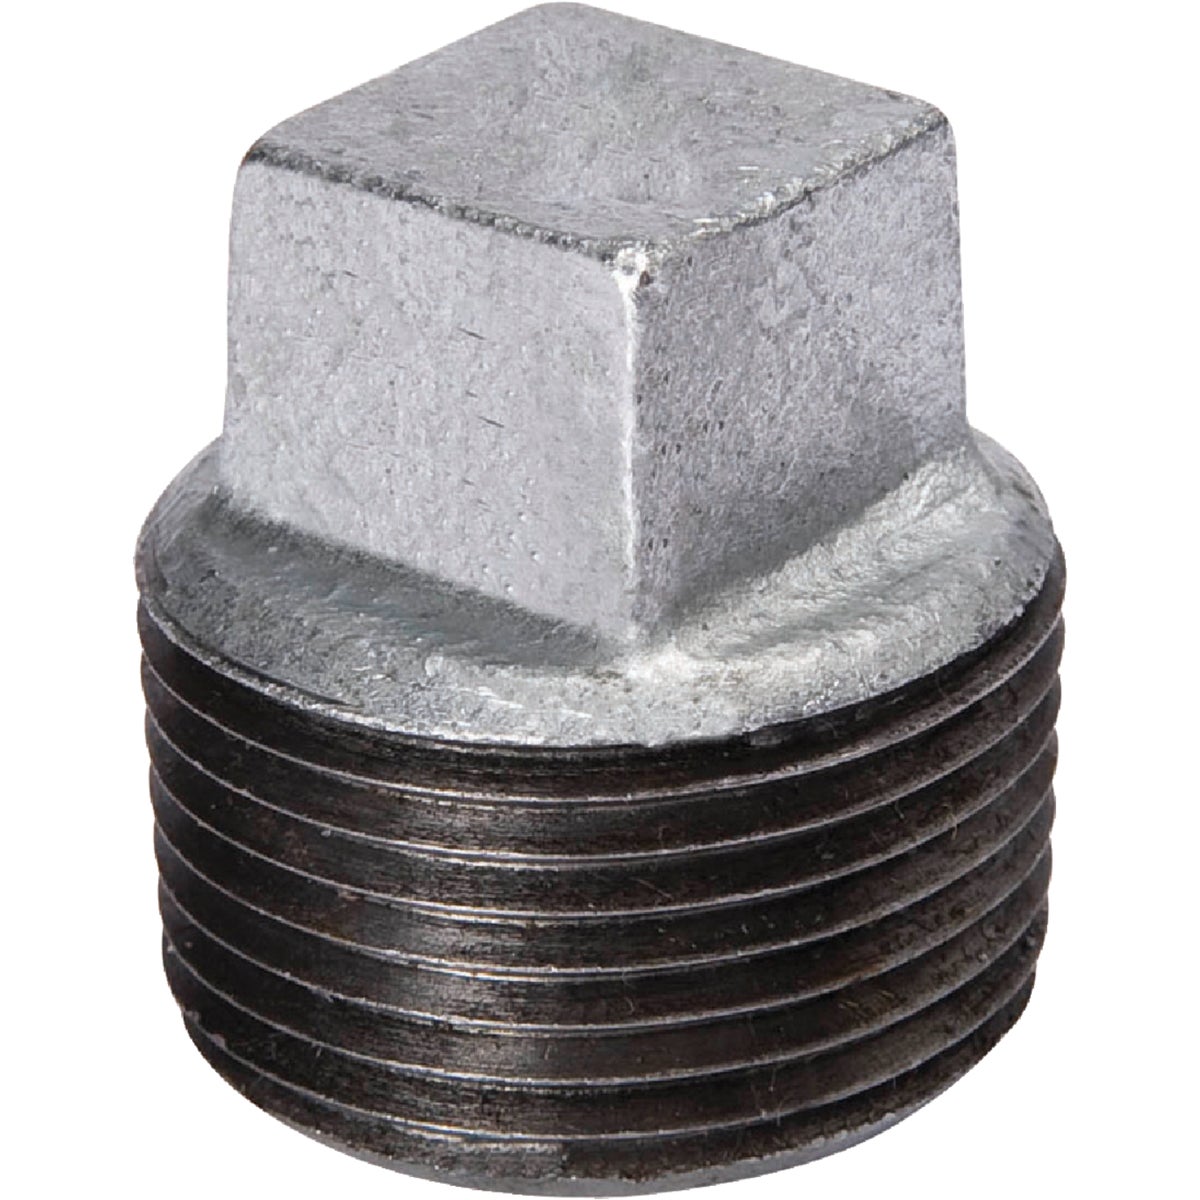 Southland 1/4 In. Malleable Iron Galvanized Plug